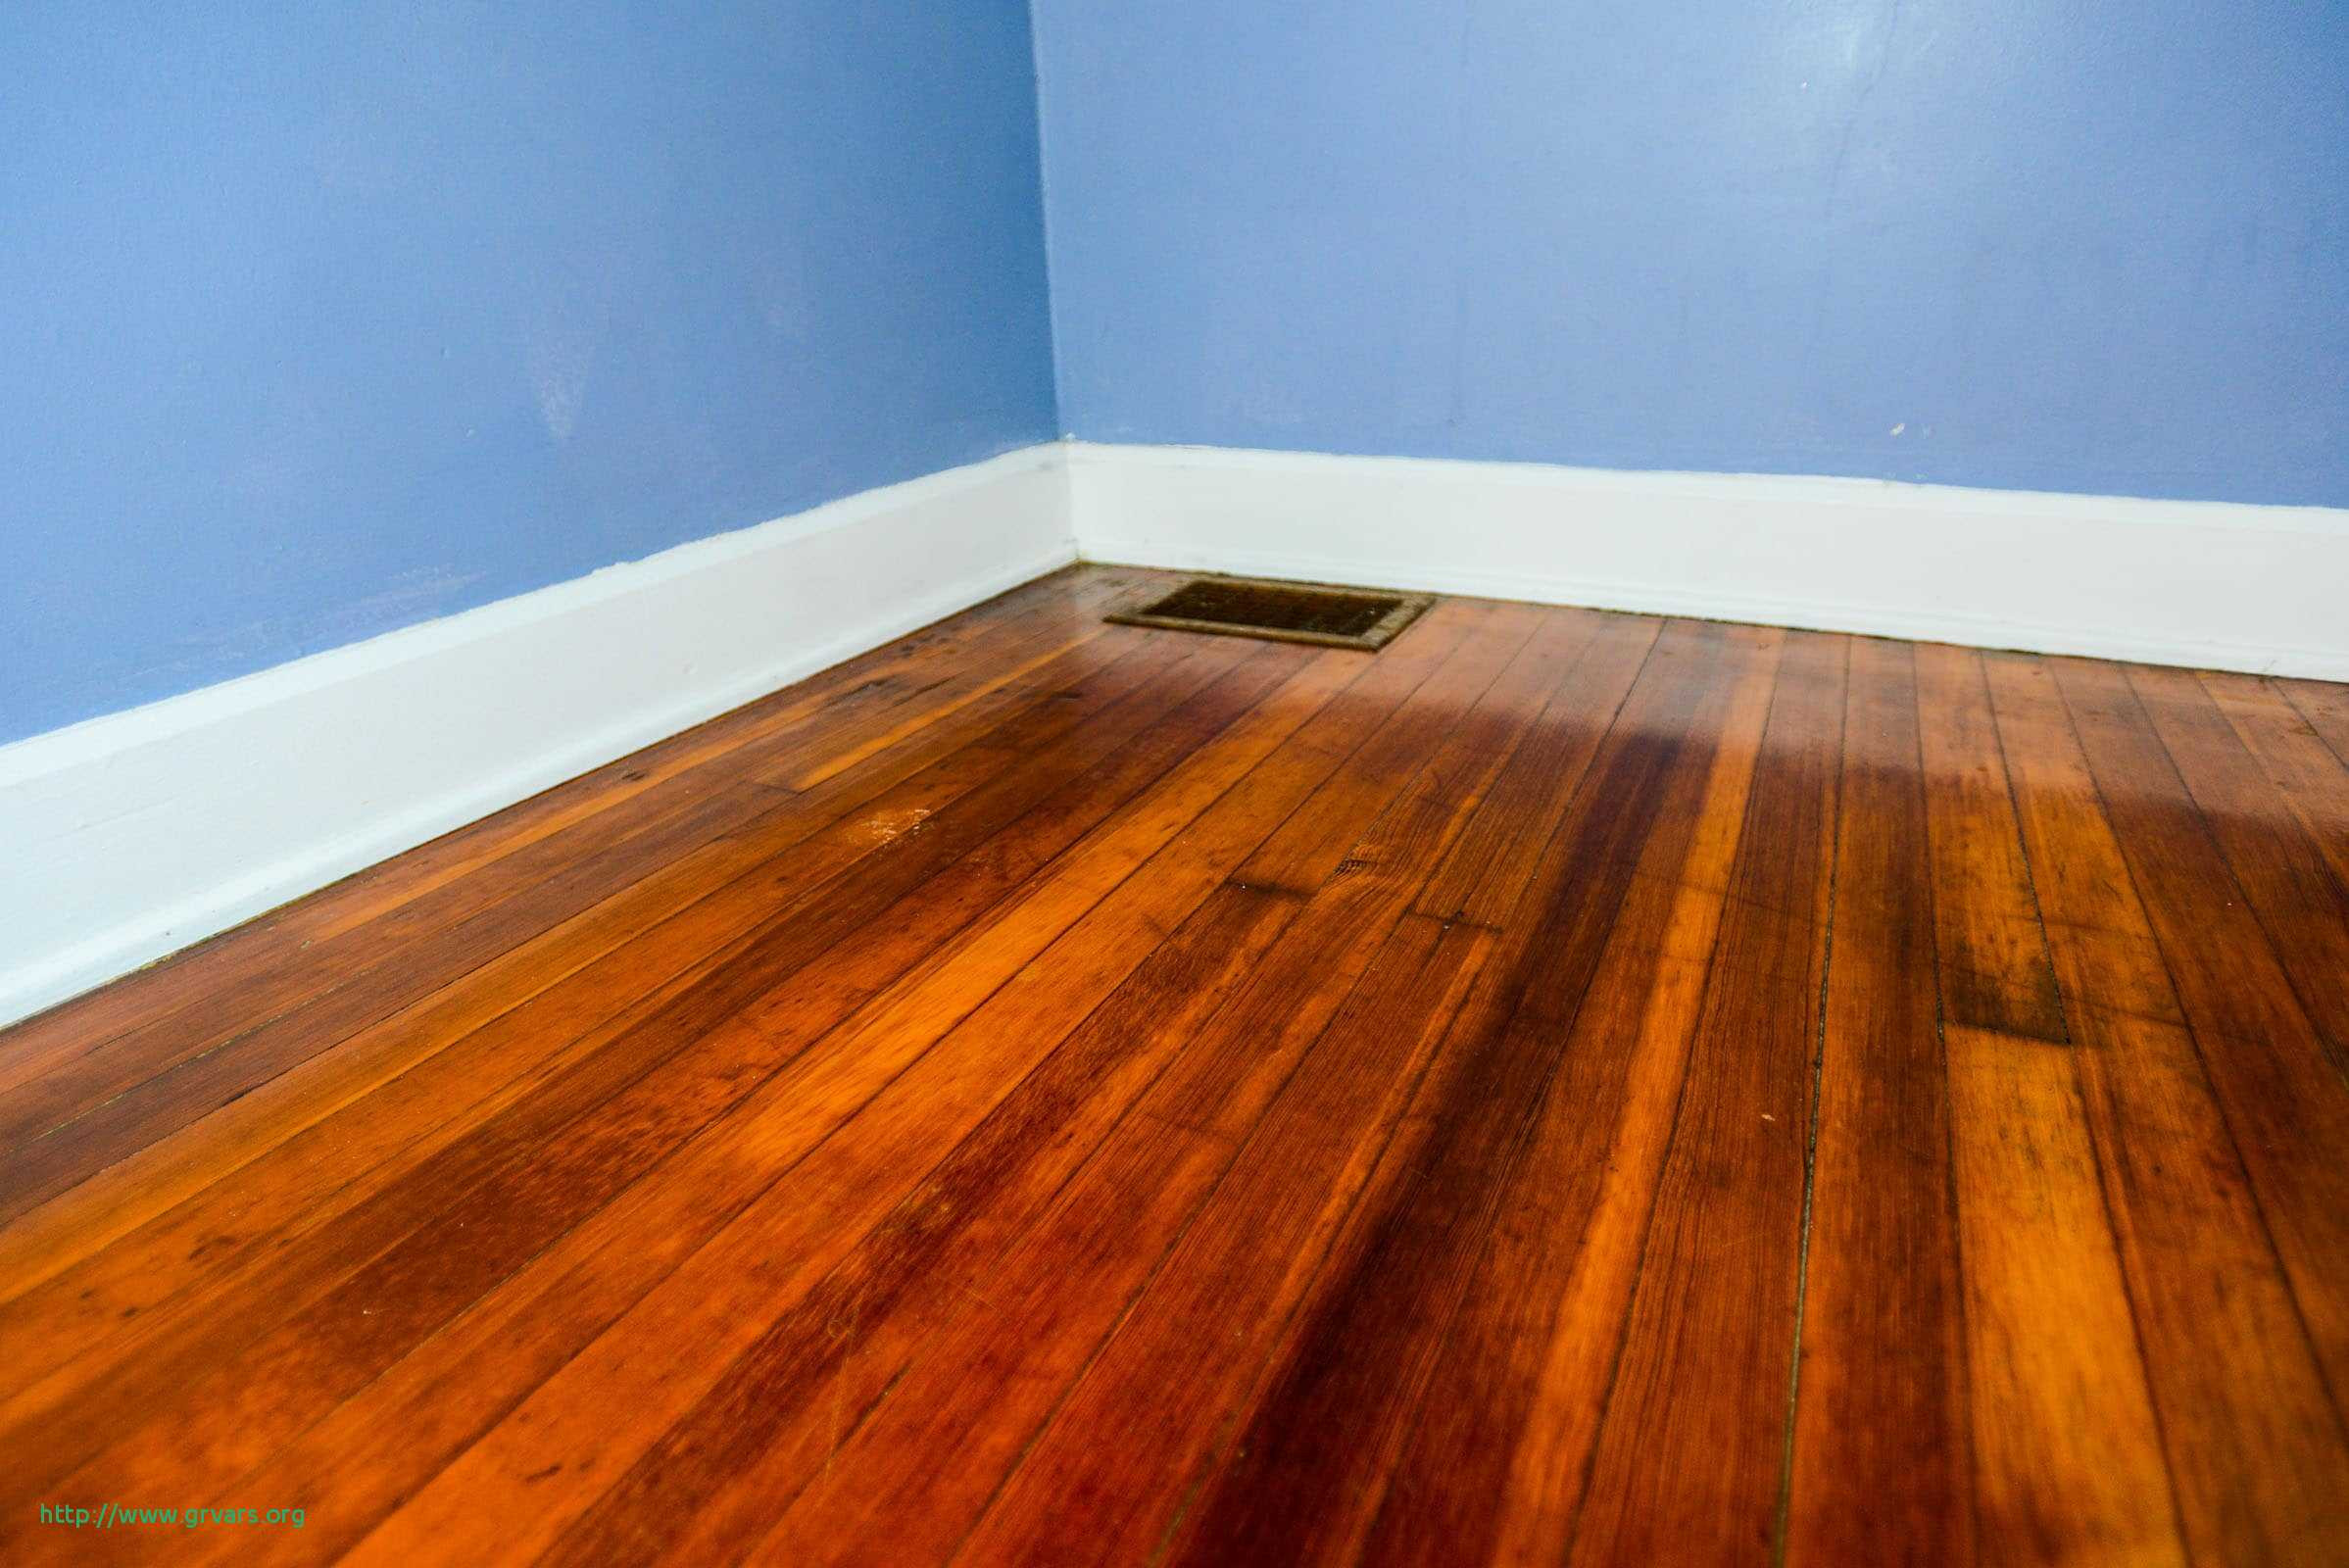 20 Cute Hardwood Flooring Questions 2024 free download hardwood flooring questions of 16 beau hardwood floor underlayment noise reduction ideas blog with regard to hardwood floor underlayment noise reduction beau how to silence a squeaking floor